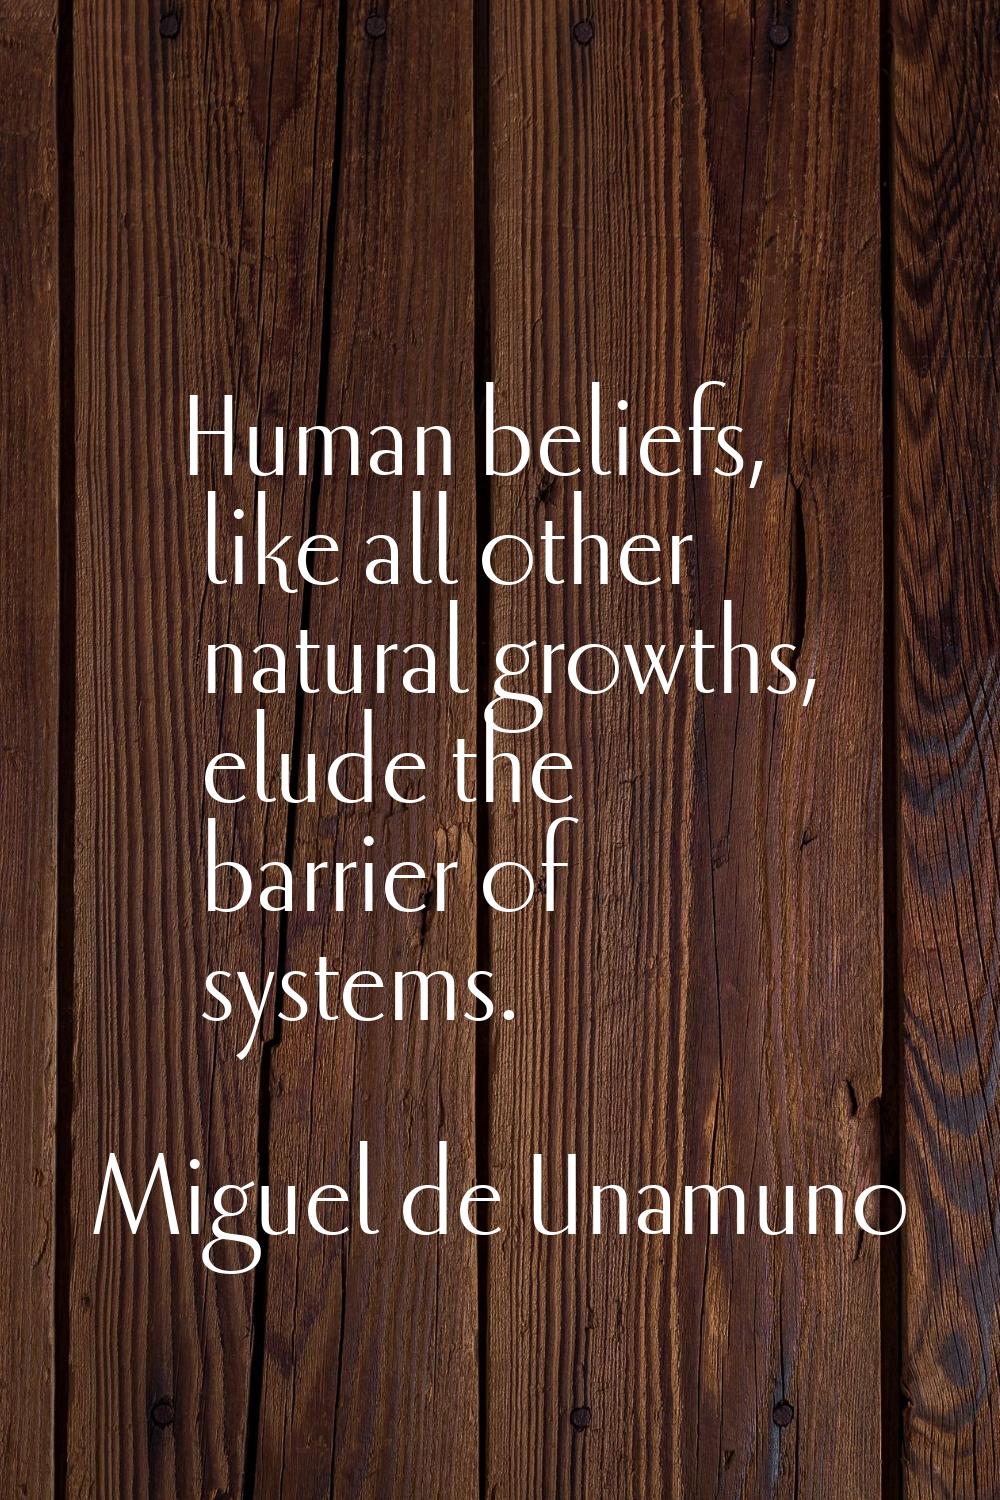 Human beliefs, like all other natural growths, elude the barrier of systems.